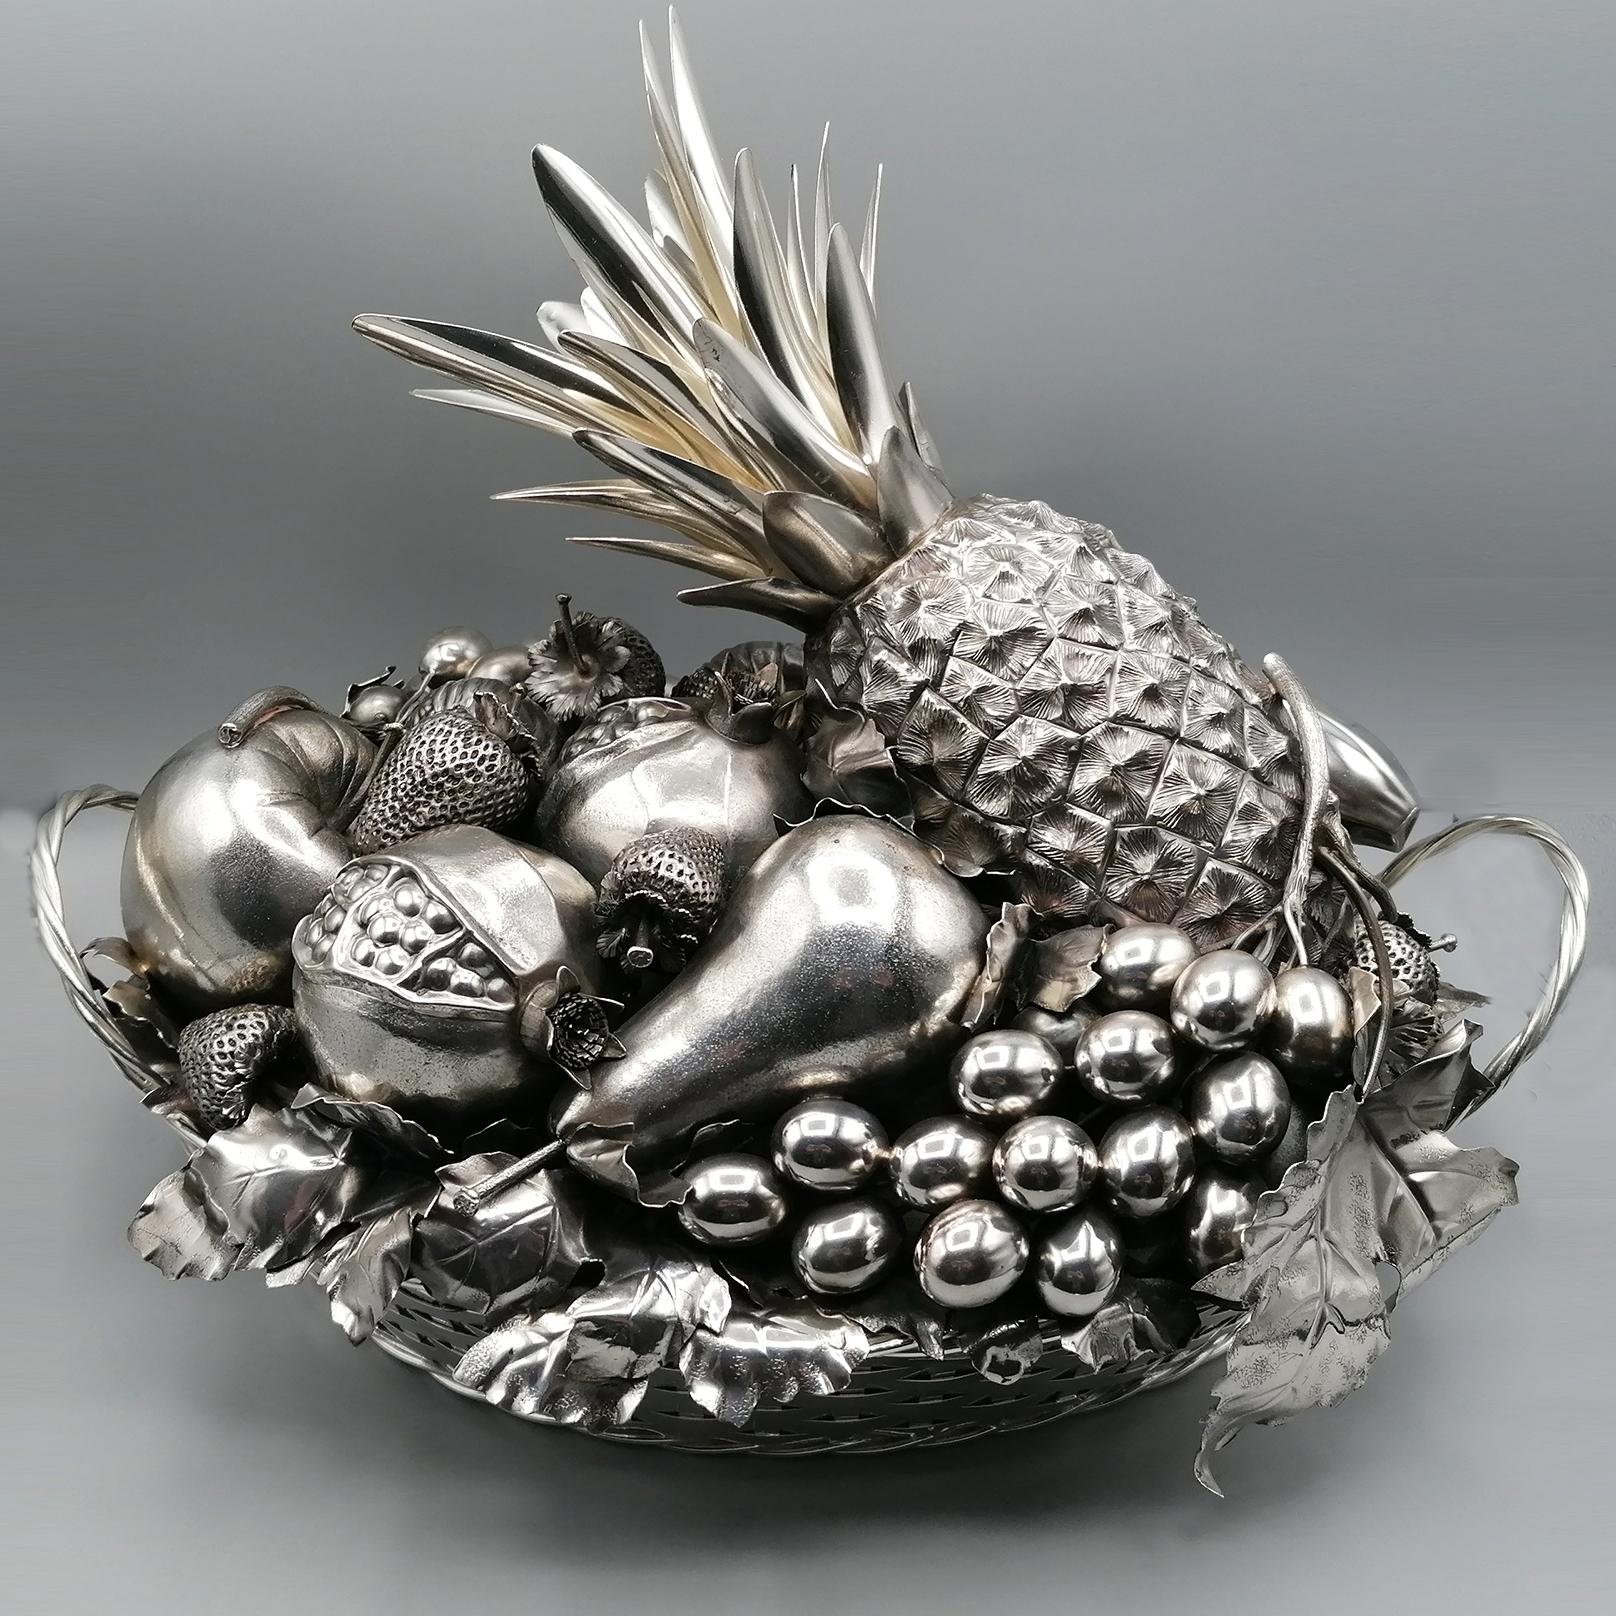 Sterling silver centerpiece made in two parts.
The bottom is an oval braided basket with two handles.
The top reproduces a triumph with various types of fruit.
Pineapples, grapes, pomegranates, strawberries, apples, bananas, etc

3,715 grams.